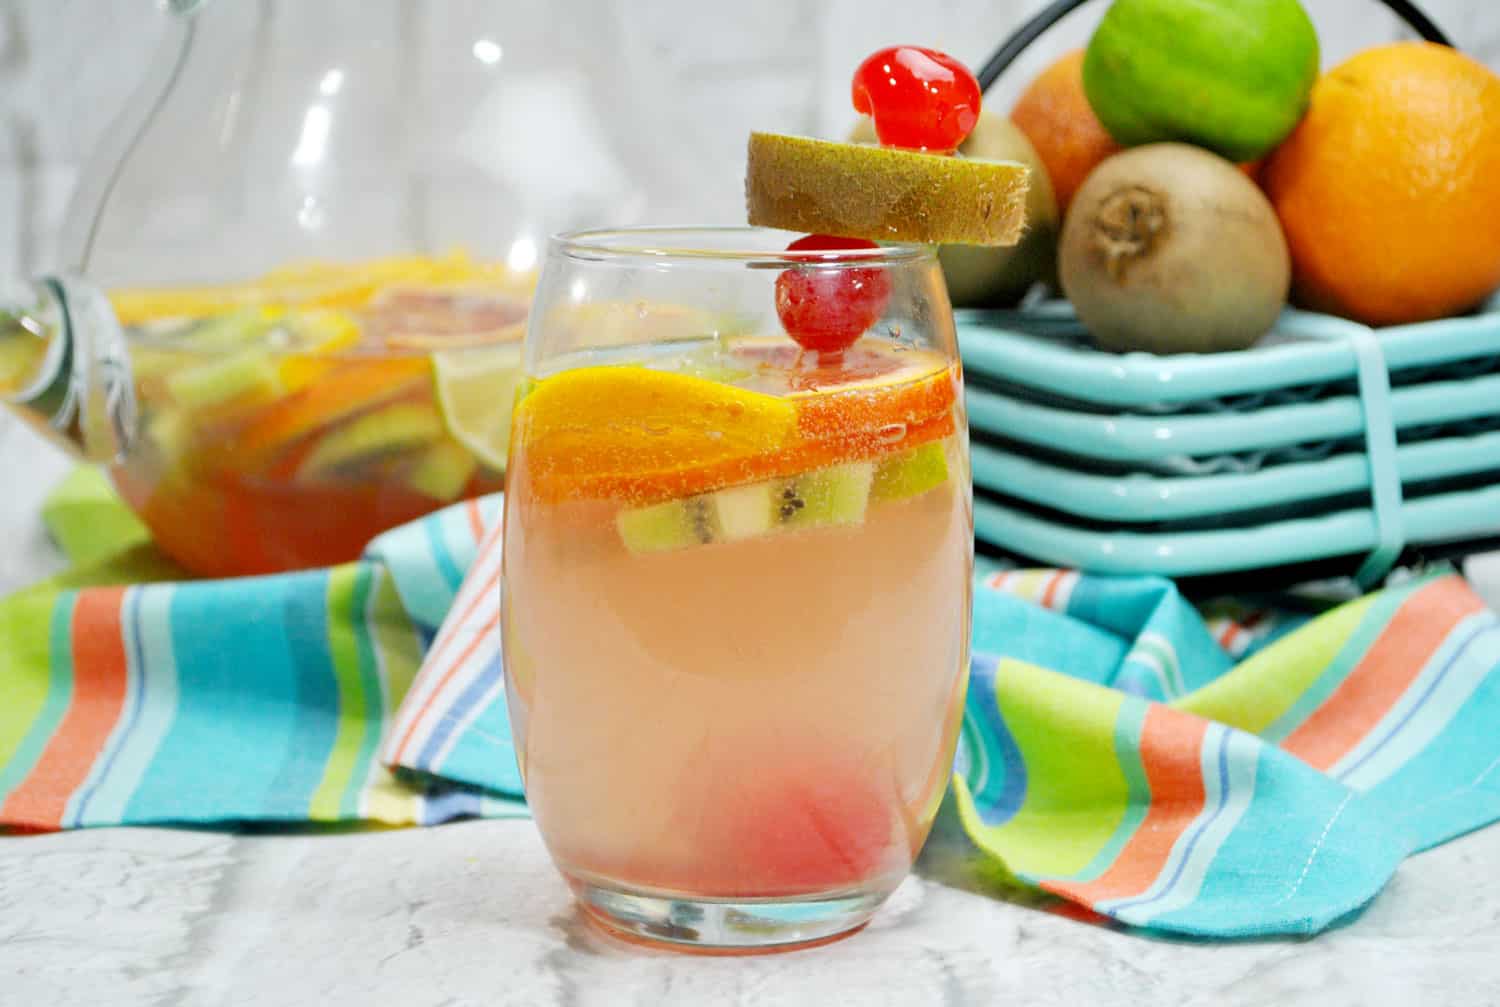 clear glass with peach colored tropical fruity sangria recipe garnished with cherries and oranges